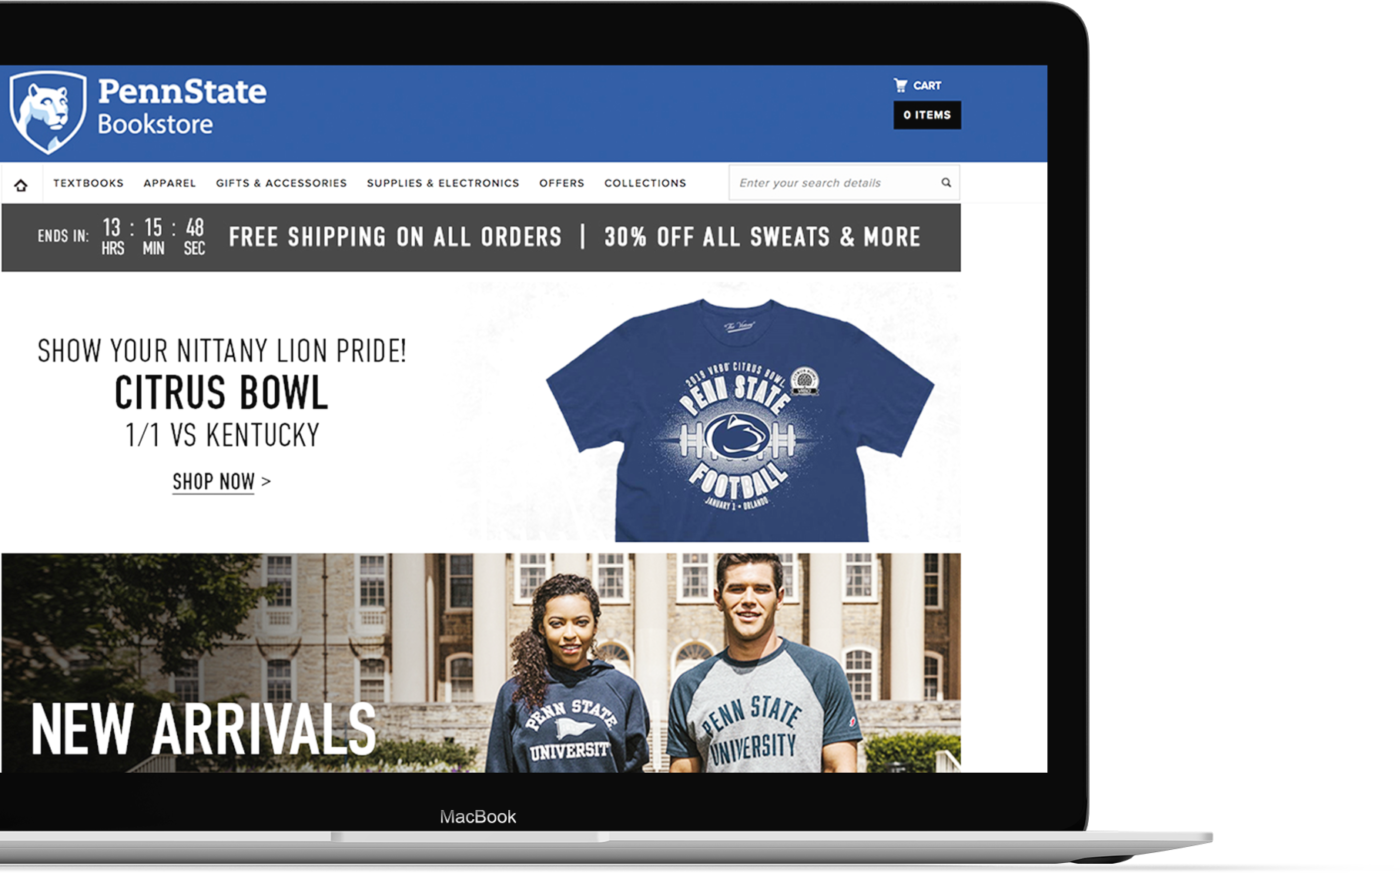 Showing ecommerce webpage that displays PennState Bookstore Merchandise